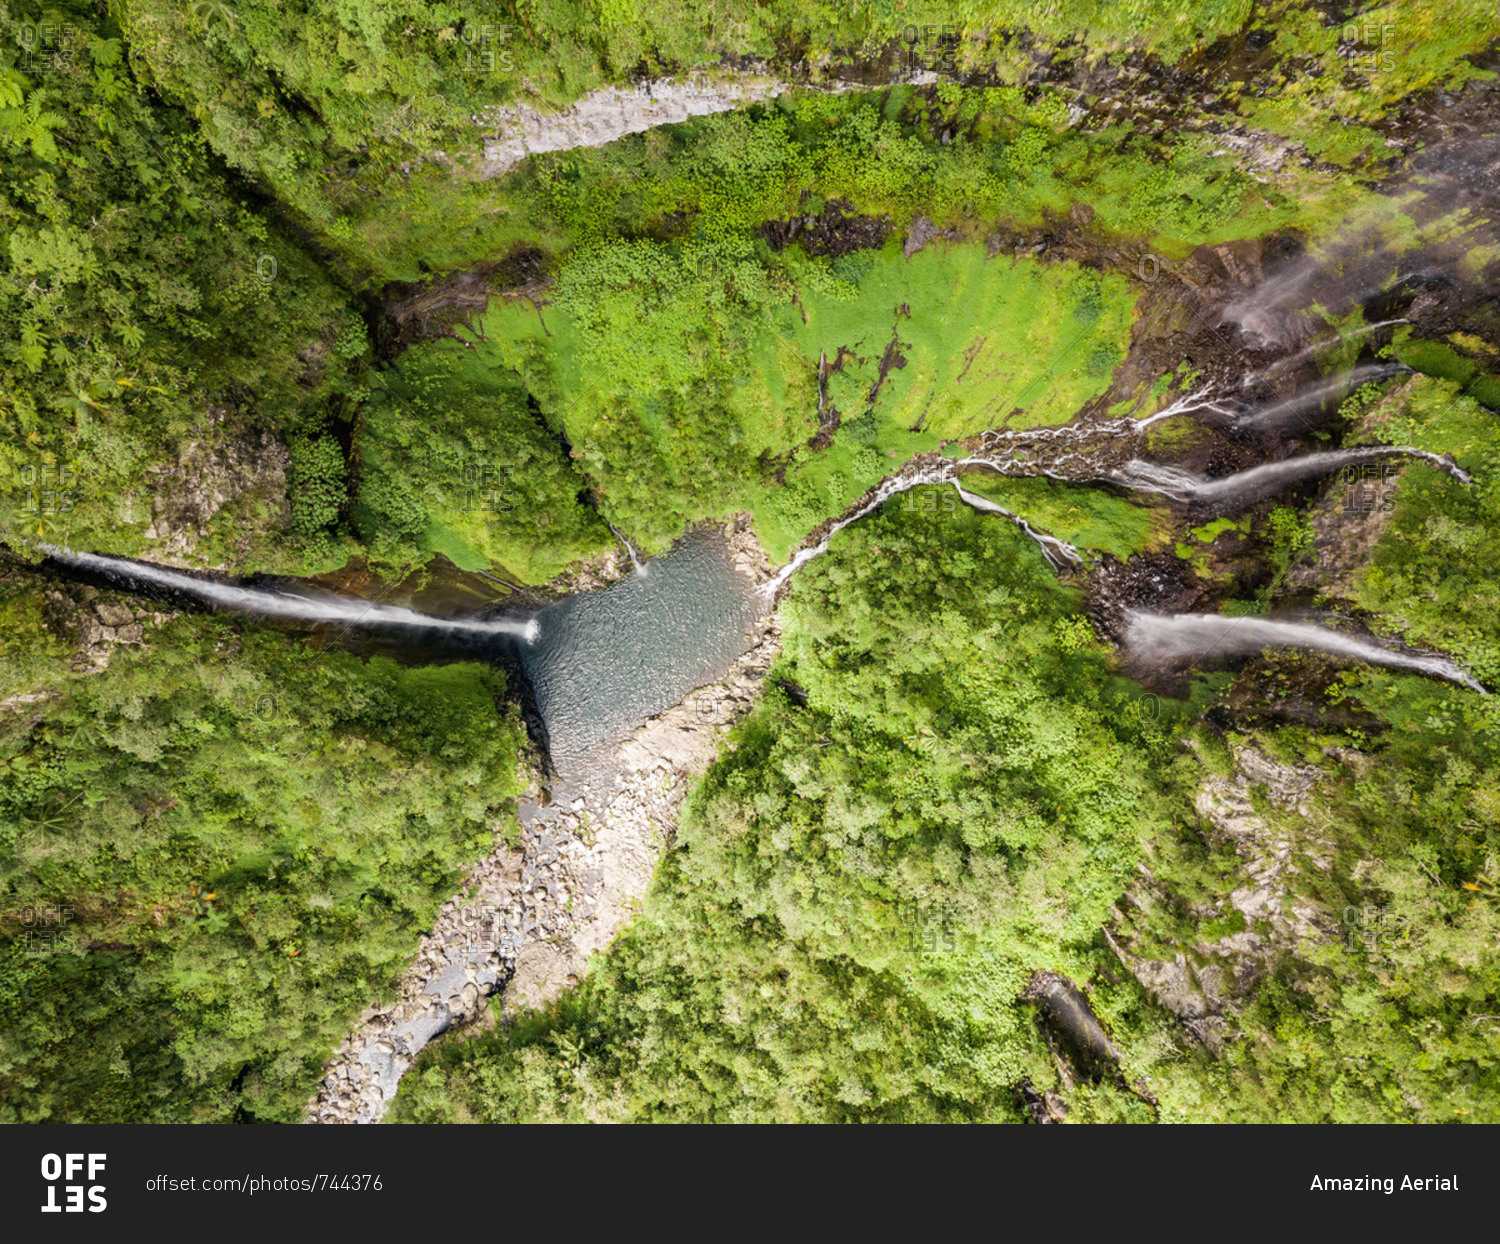 Aerial view of voile de la Mariee waterfall, Reunion island.